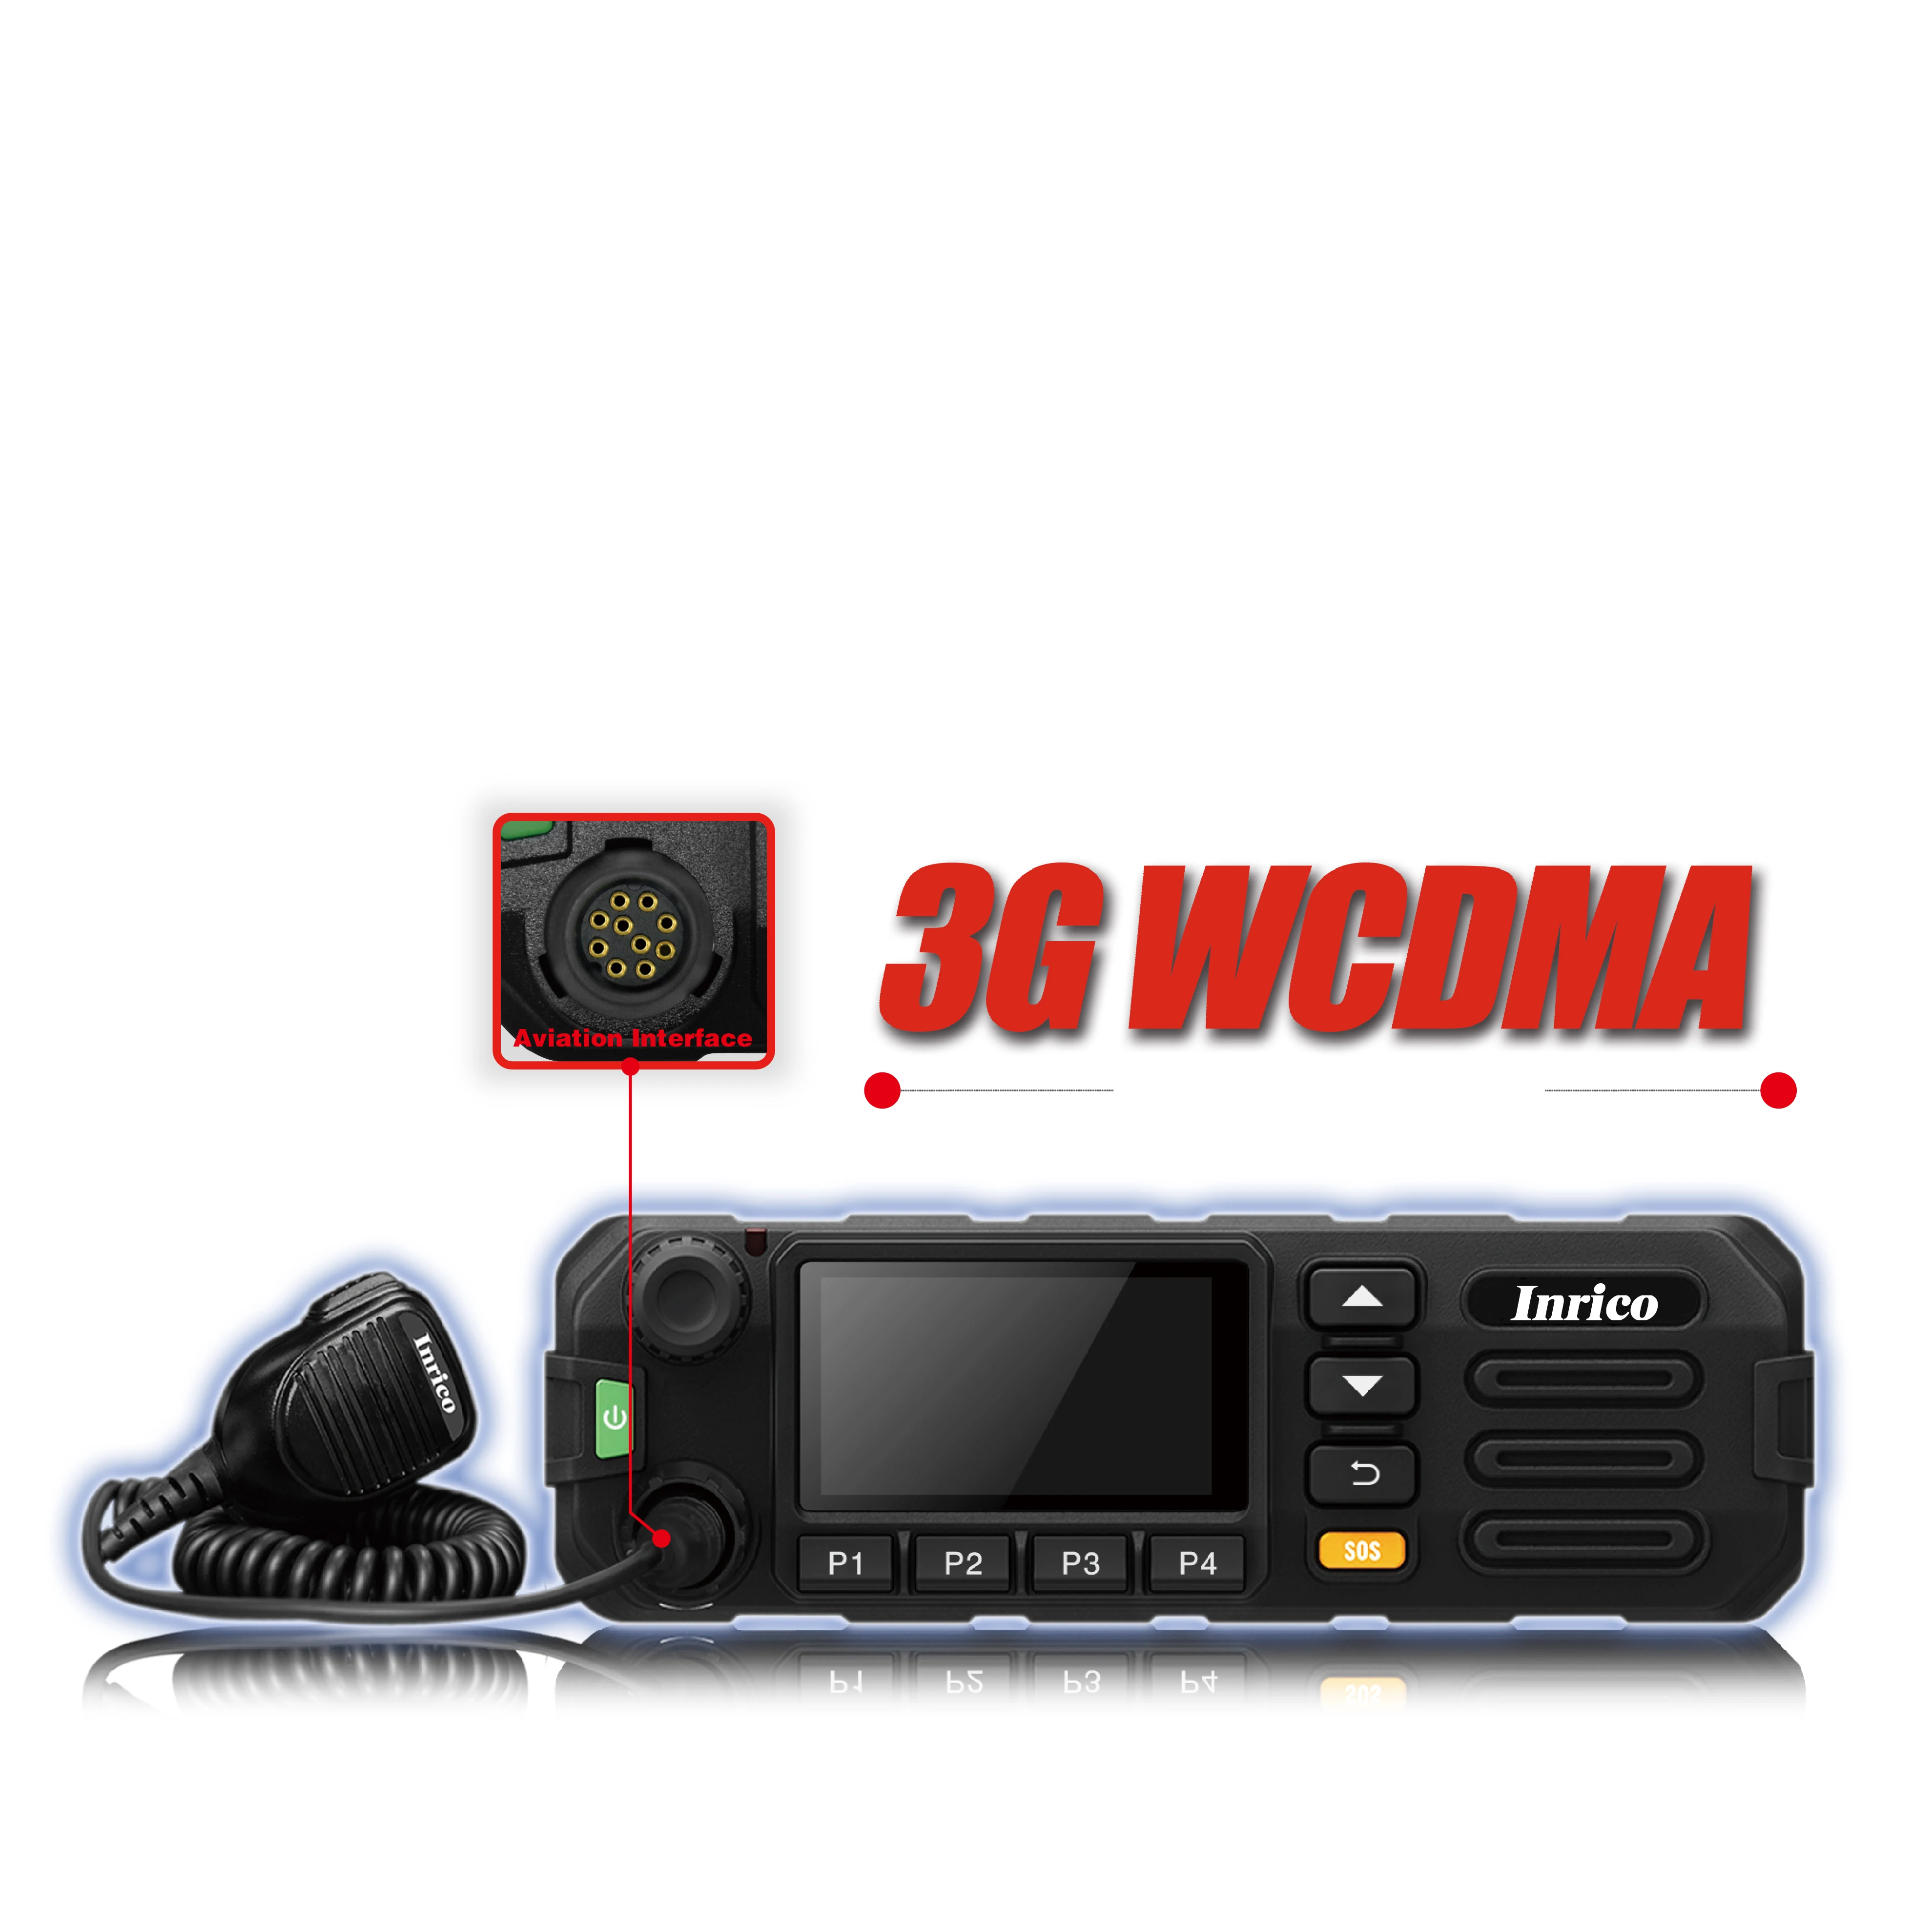 

Inrico TM-8 latest GSM WCDMA 3G PTT mobile radio for car with SIM card and WiFi